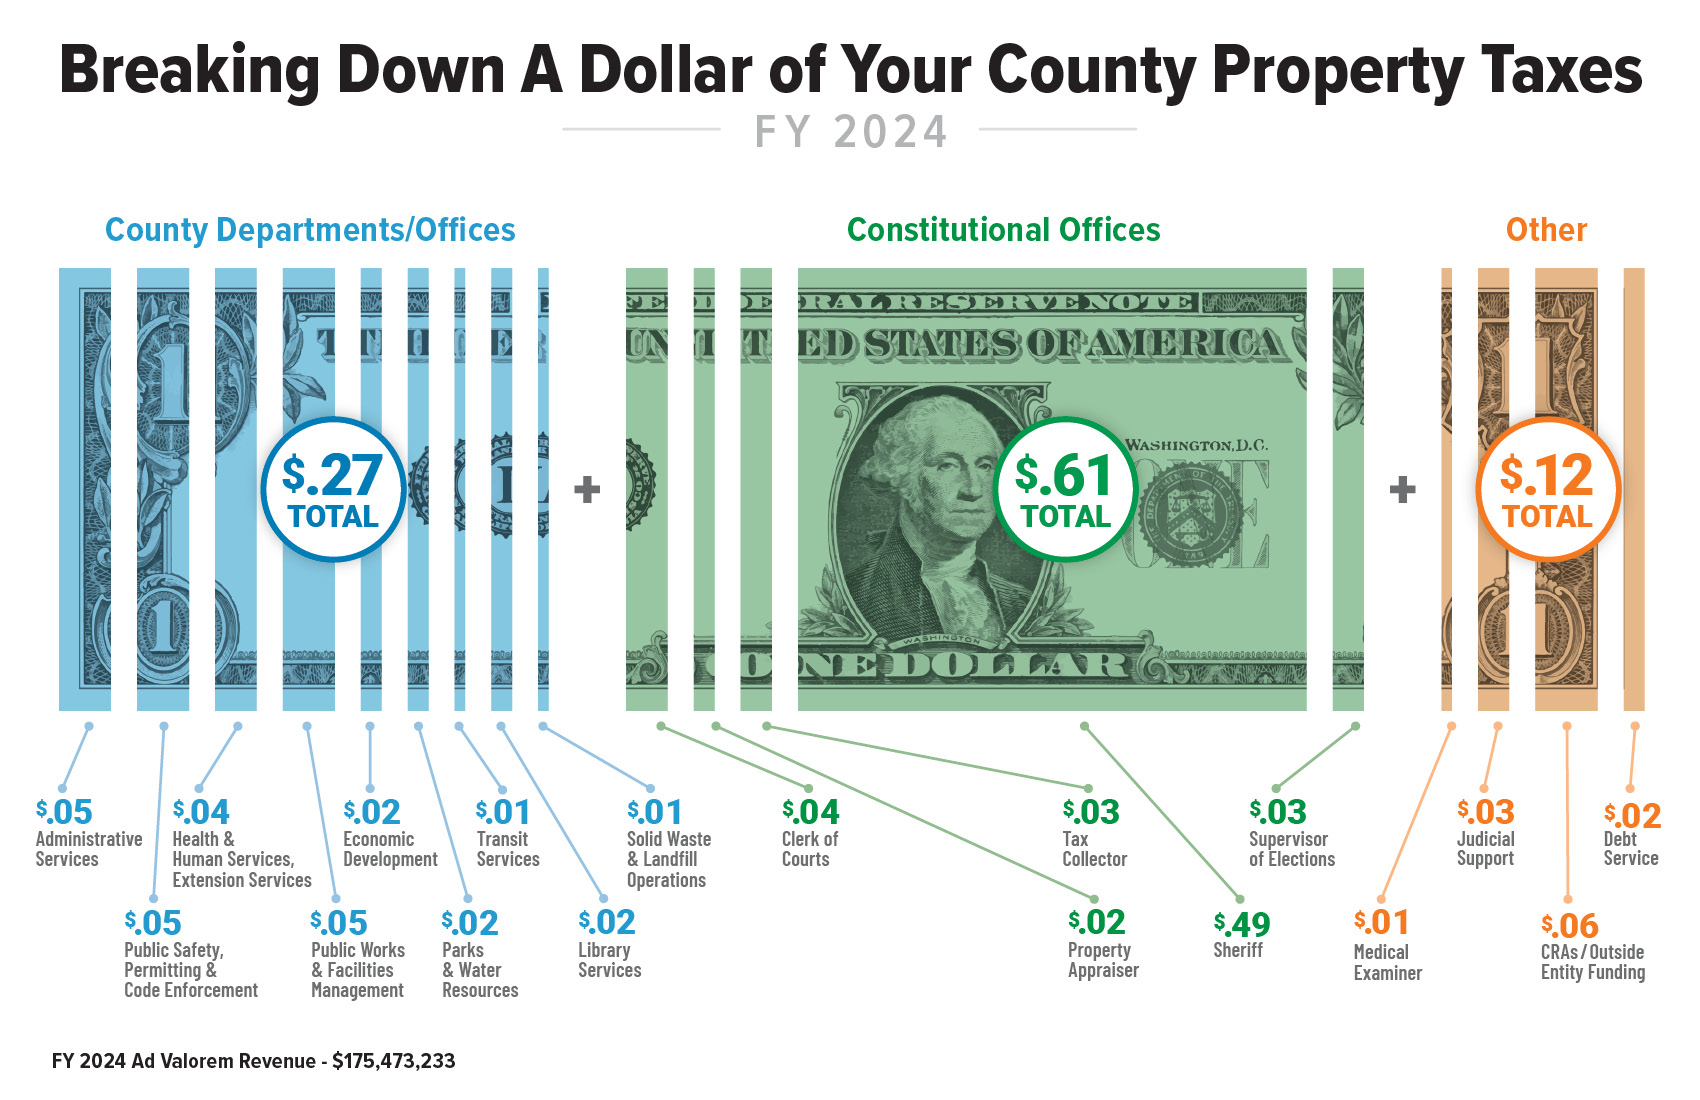 Breaking down a dollar of your County Property Taxes (FY 2024)